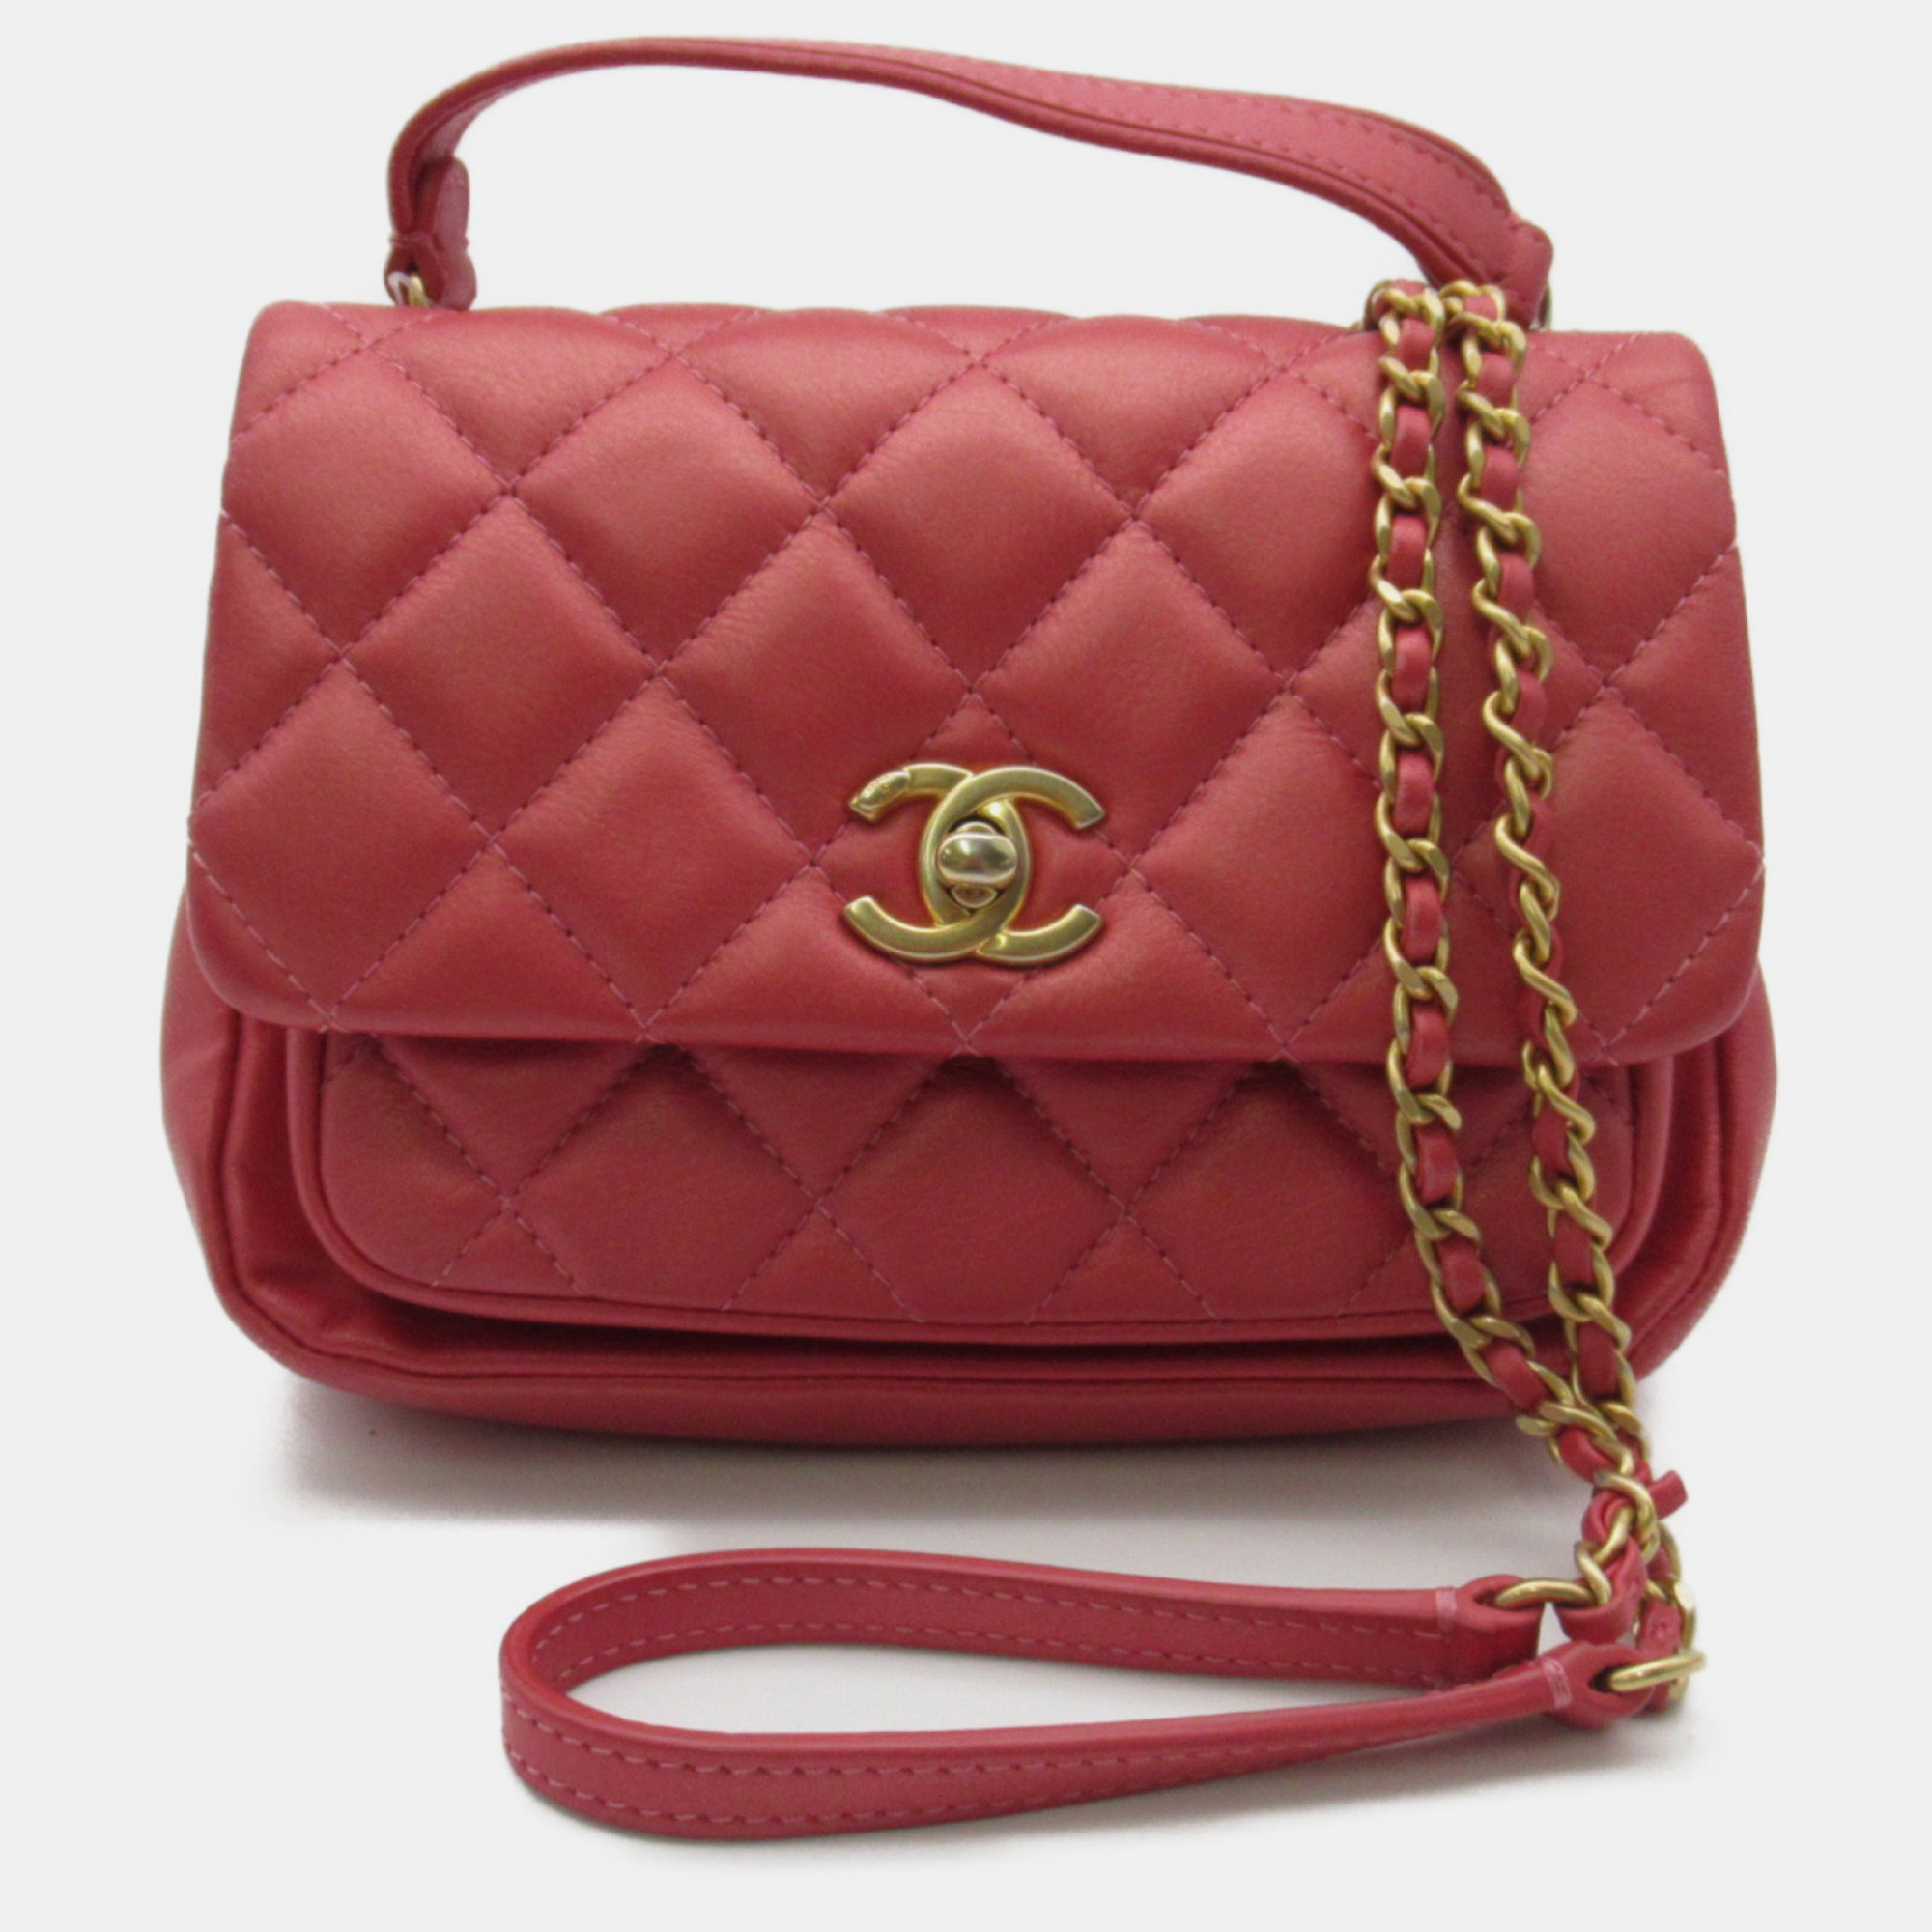 Chanel red caviar leather mini business affinity shoulder bag